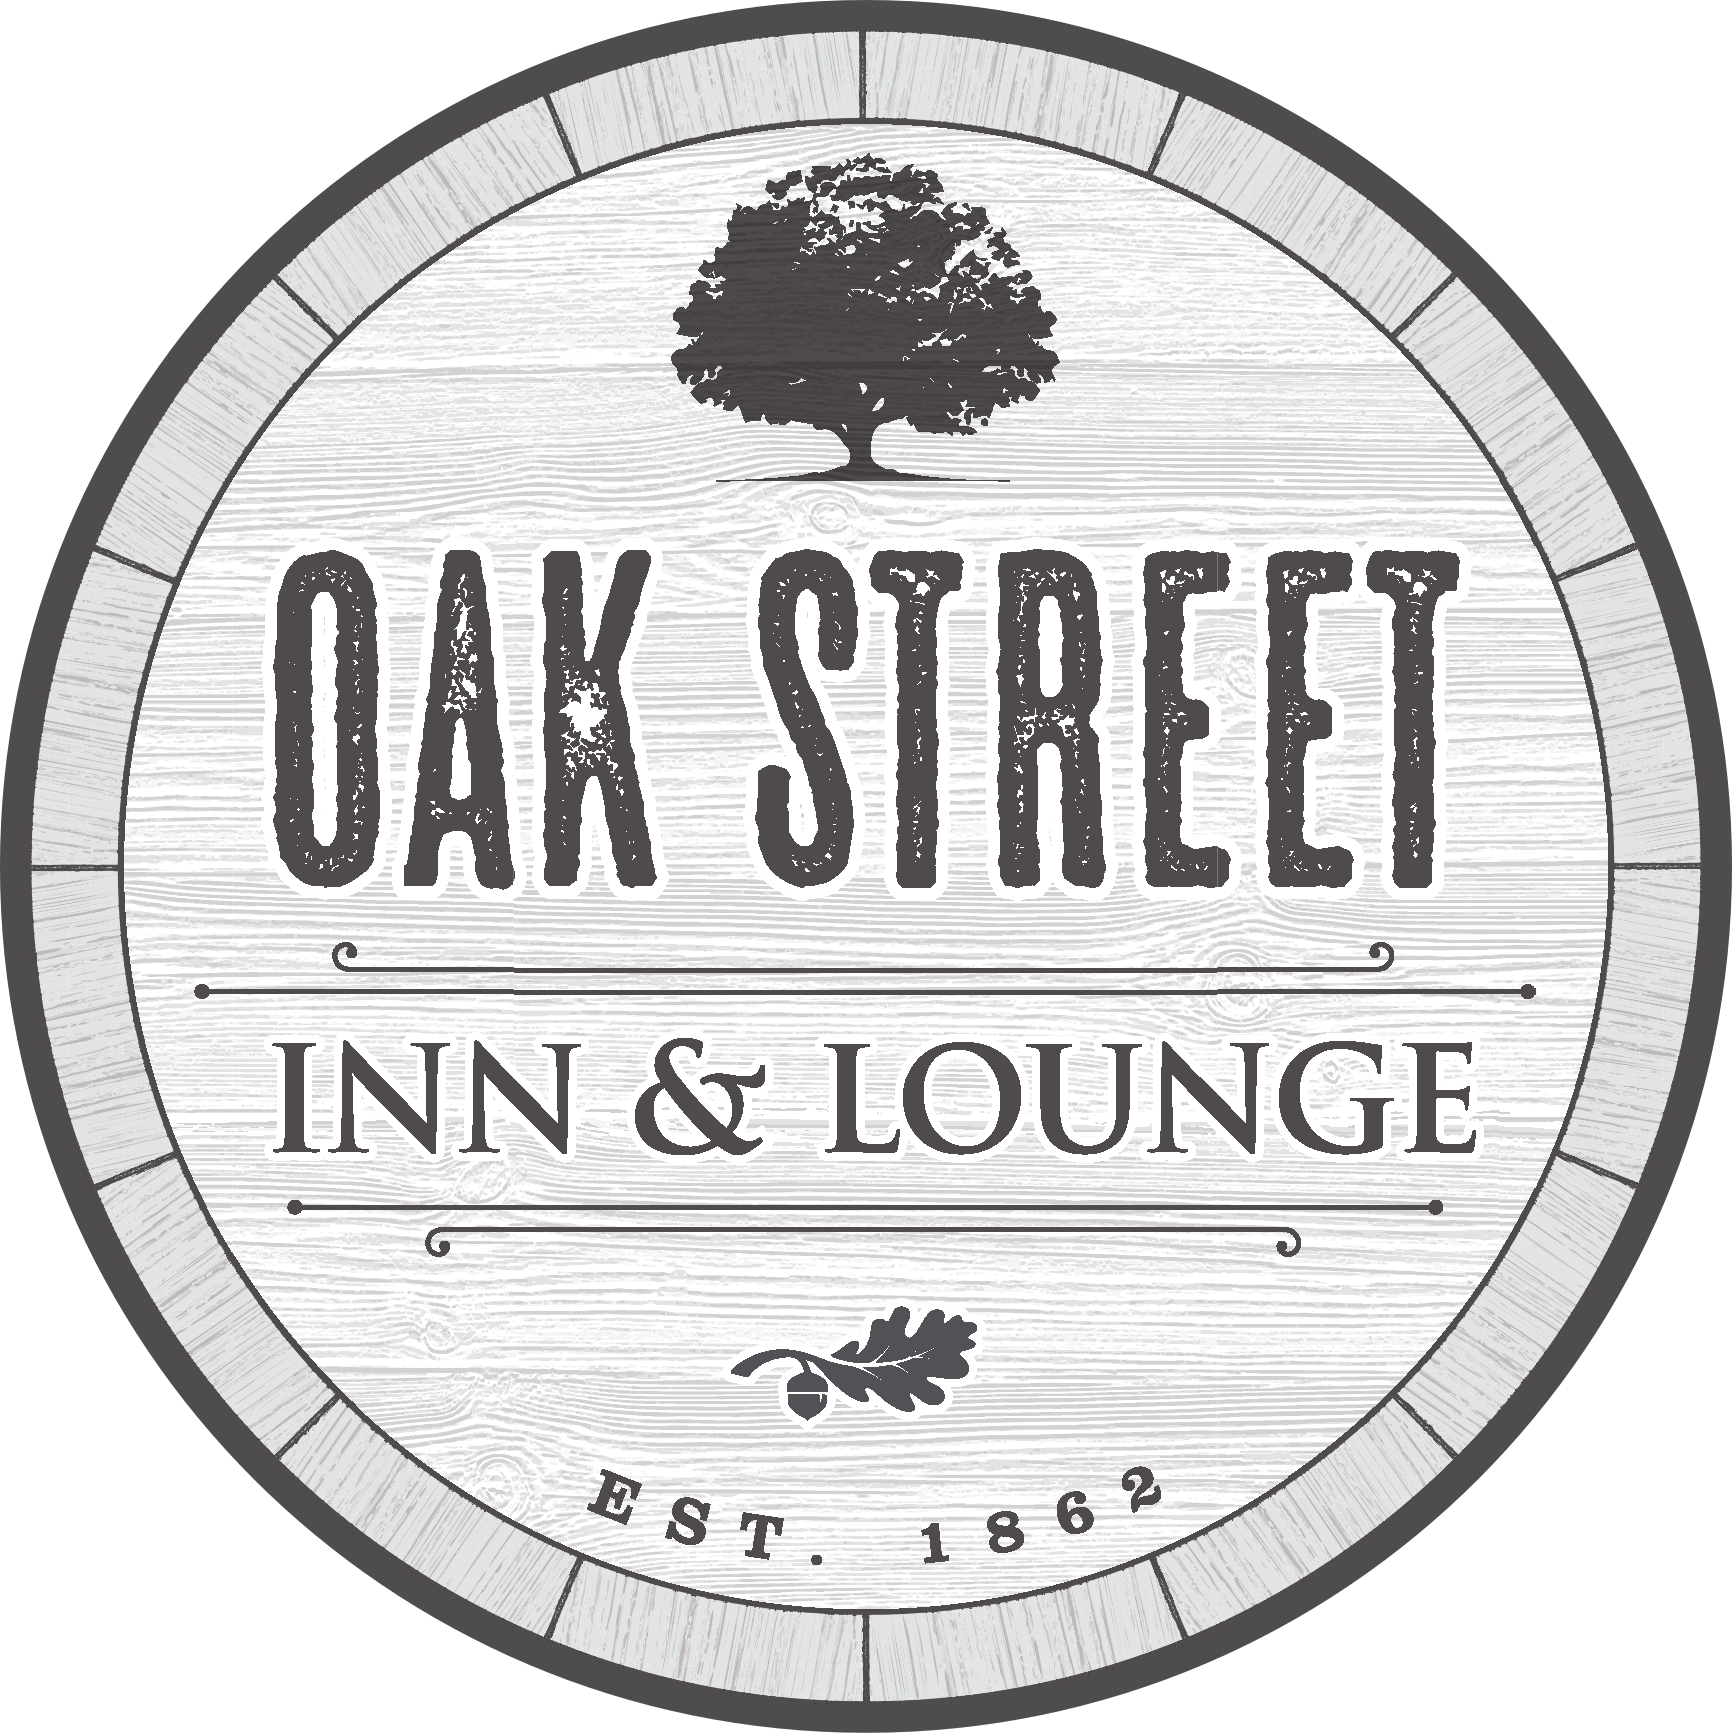 The logo for oak street inn and lounge is a wooden barrel with a tree on it.